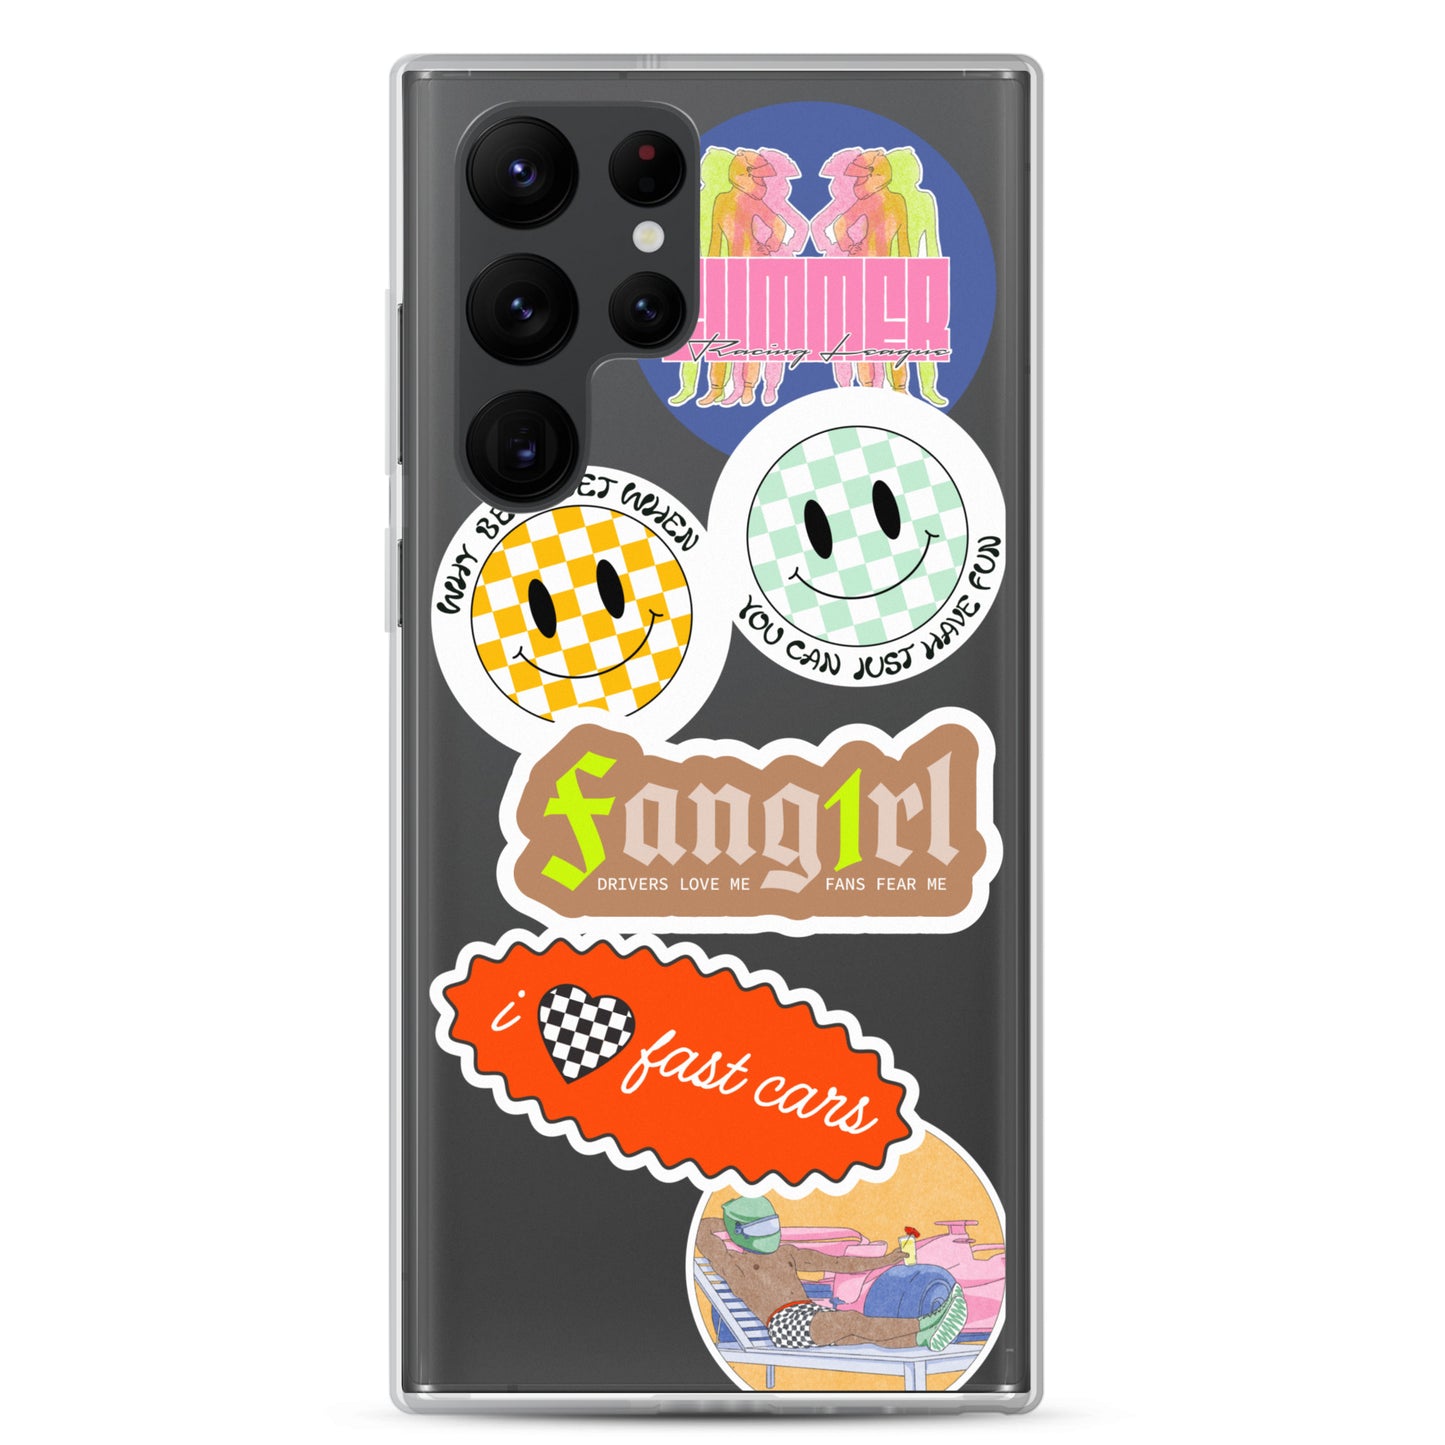 TG1F Sticker Android Phone Case